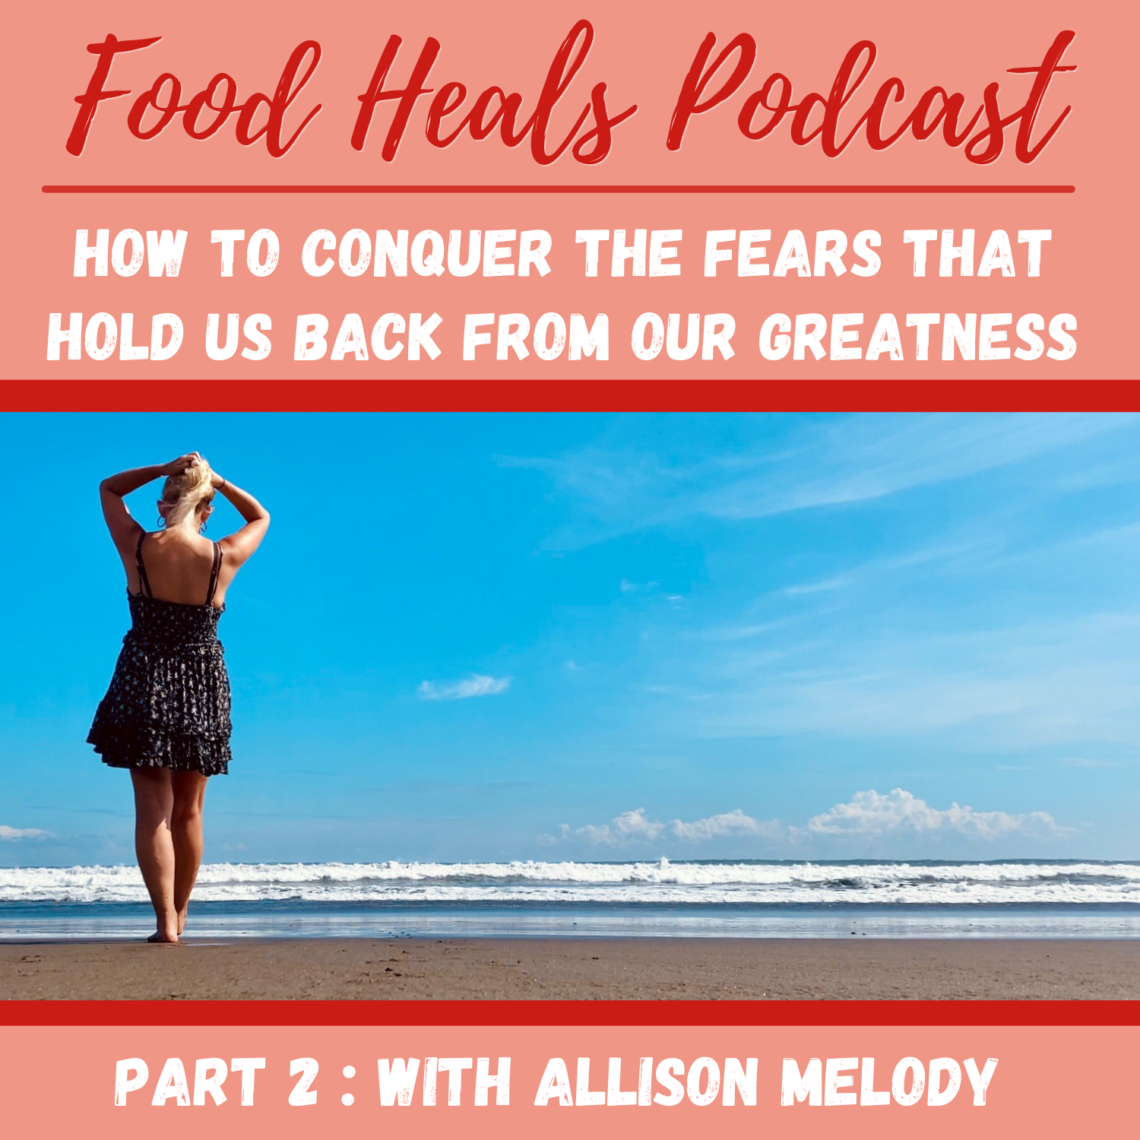 How to Conquer the Fears That Hold Us Back From Our Greatness (Part 2) of The Food Heals Podcast with Allison Melody